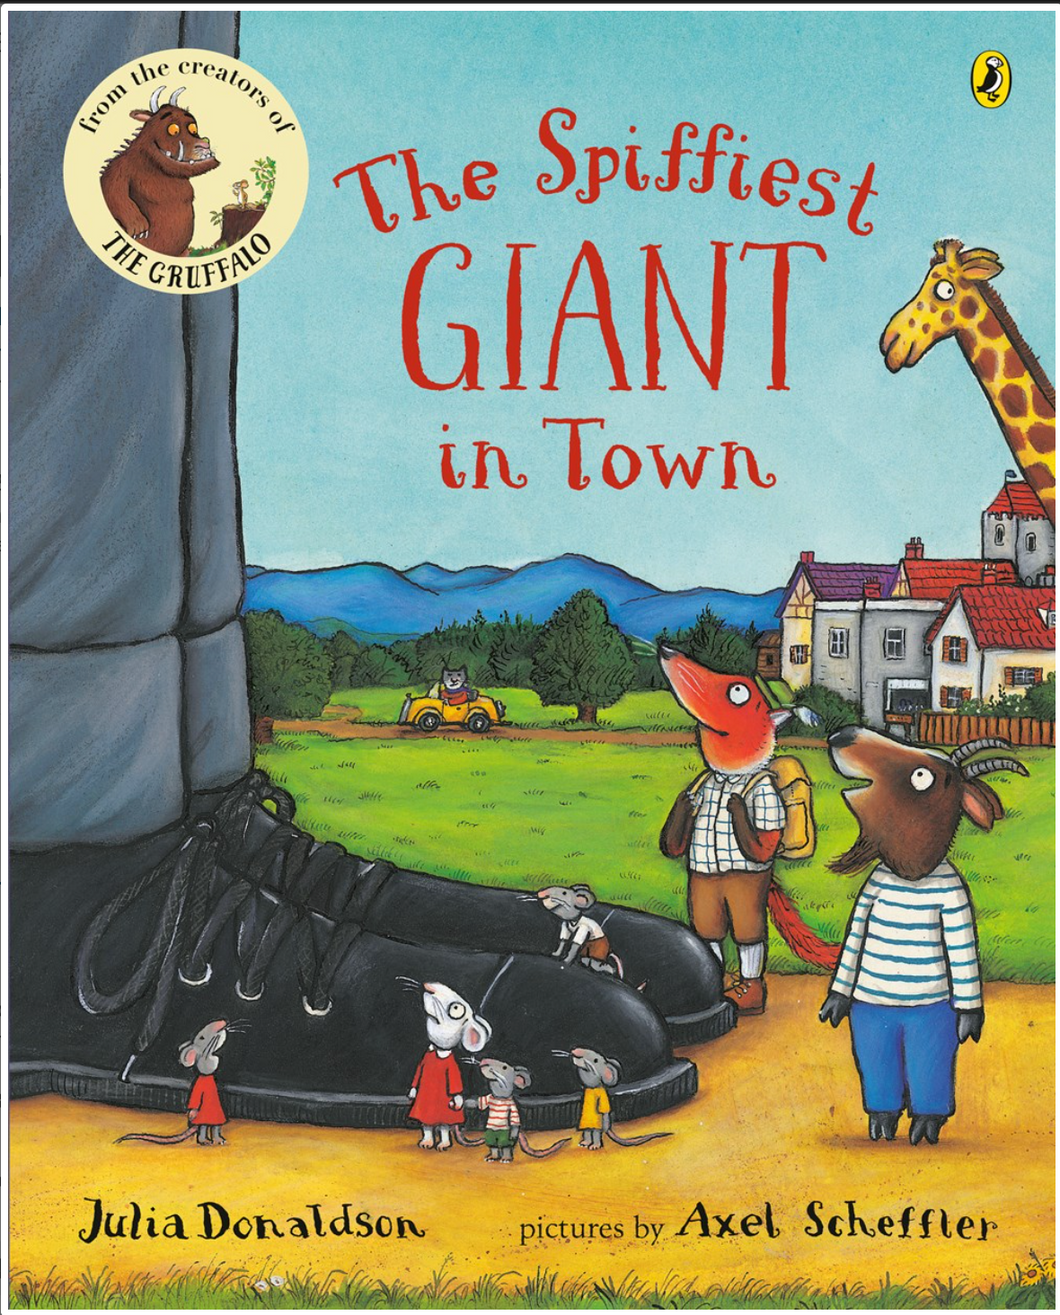 The Spiffiest Giant in Town